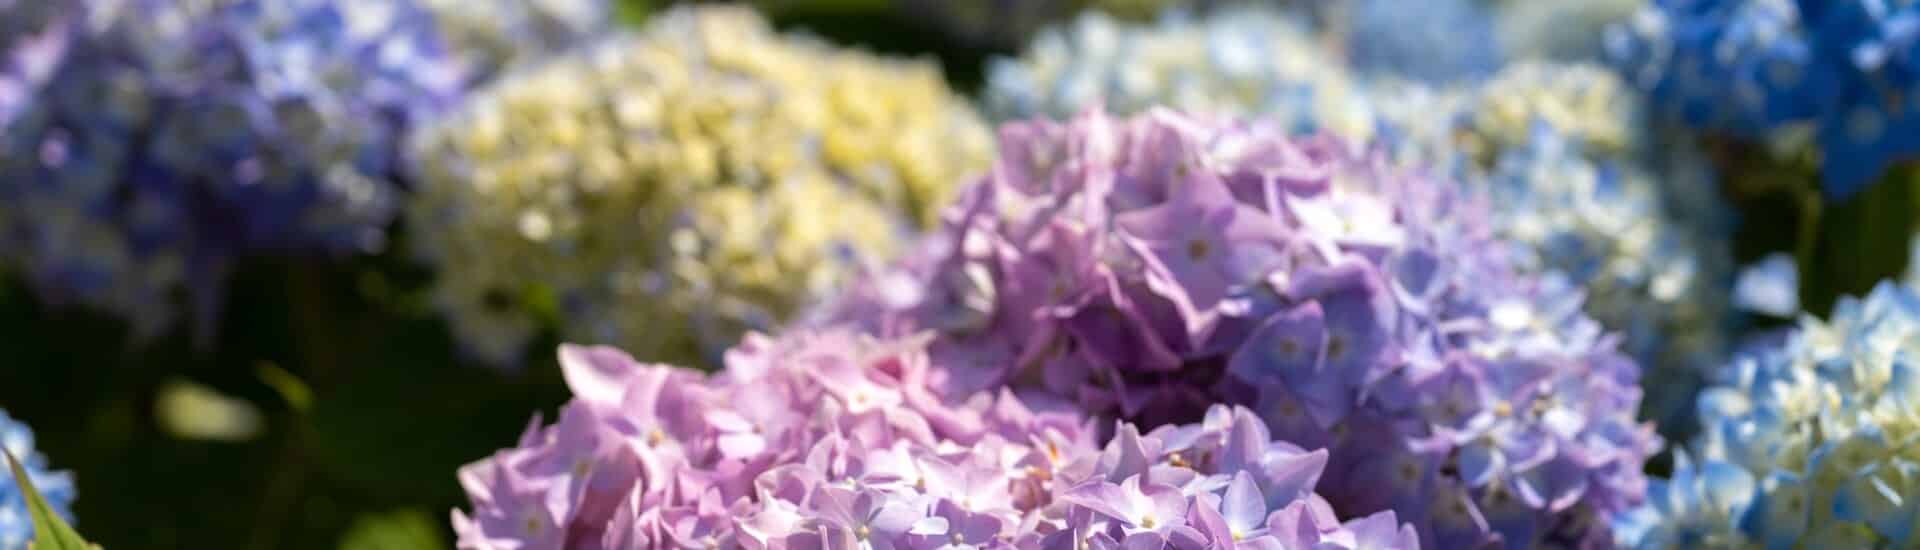 Large pink, green and purple hydrangea blooms in sunlight